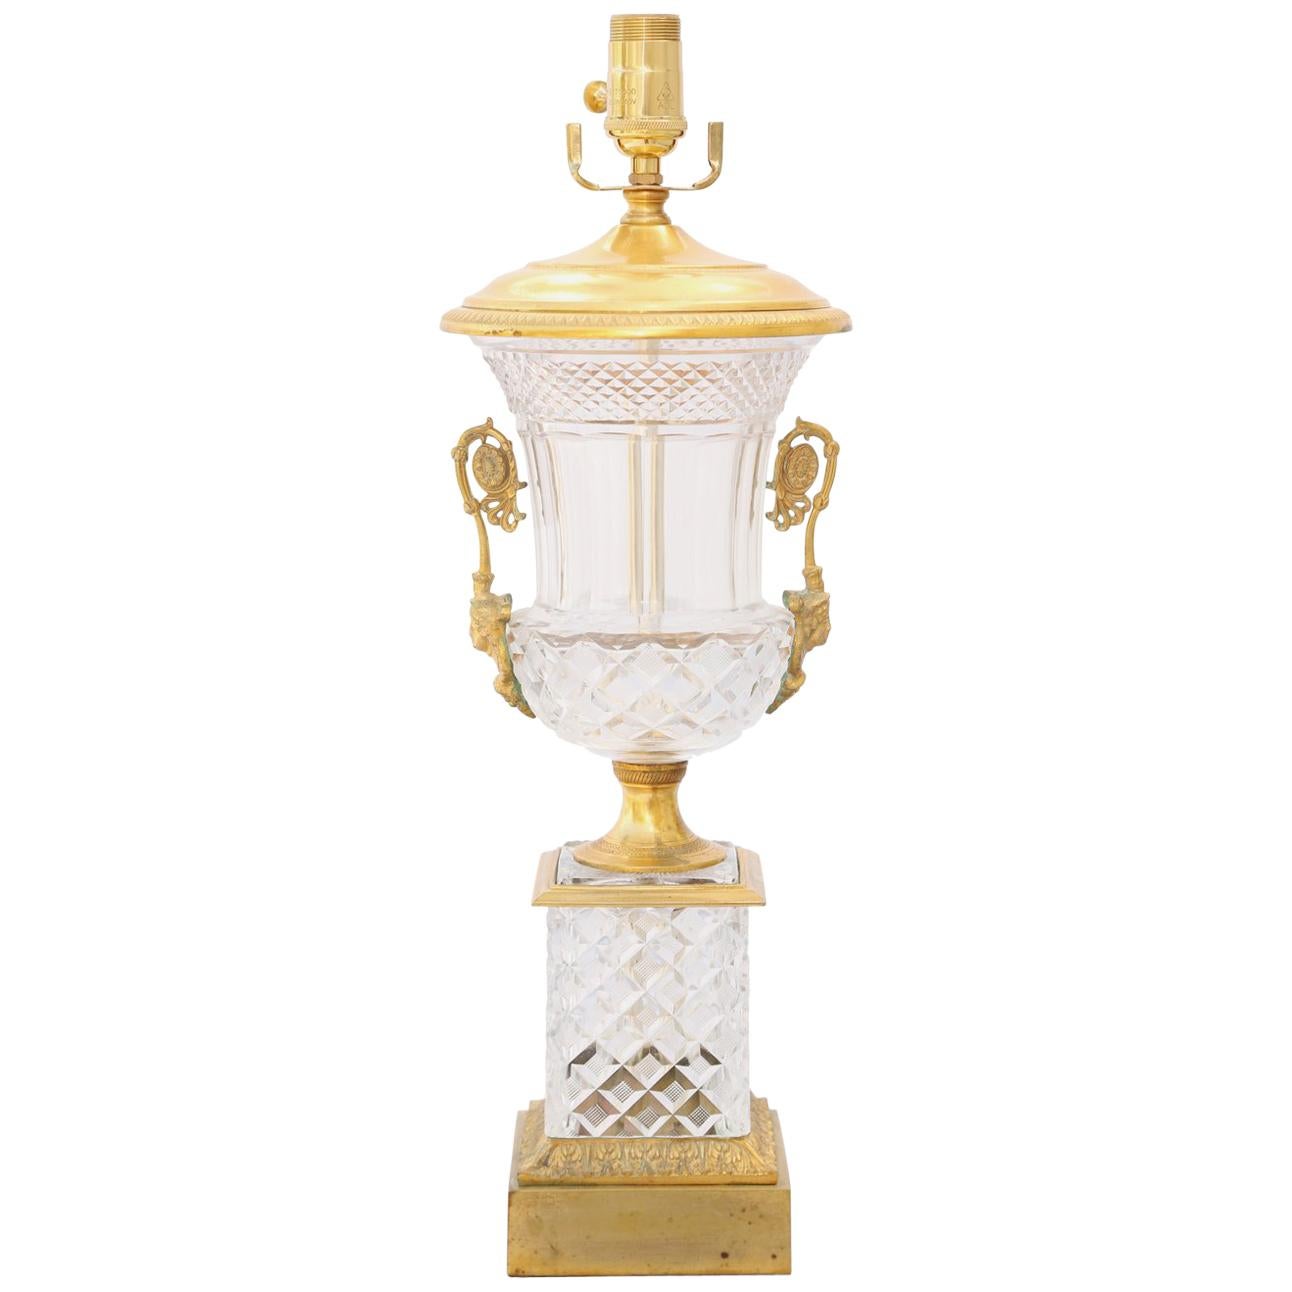 Fine, French Cut Crystal and Ormolu, Urn-Form Table Lamp